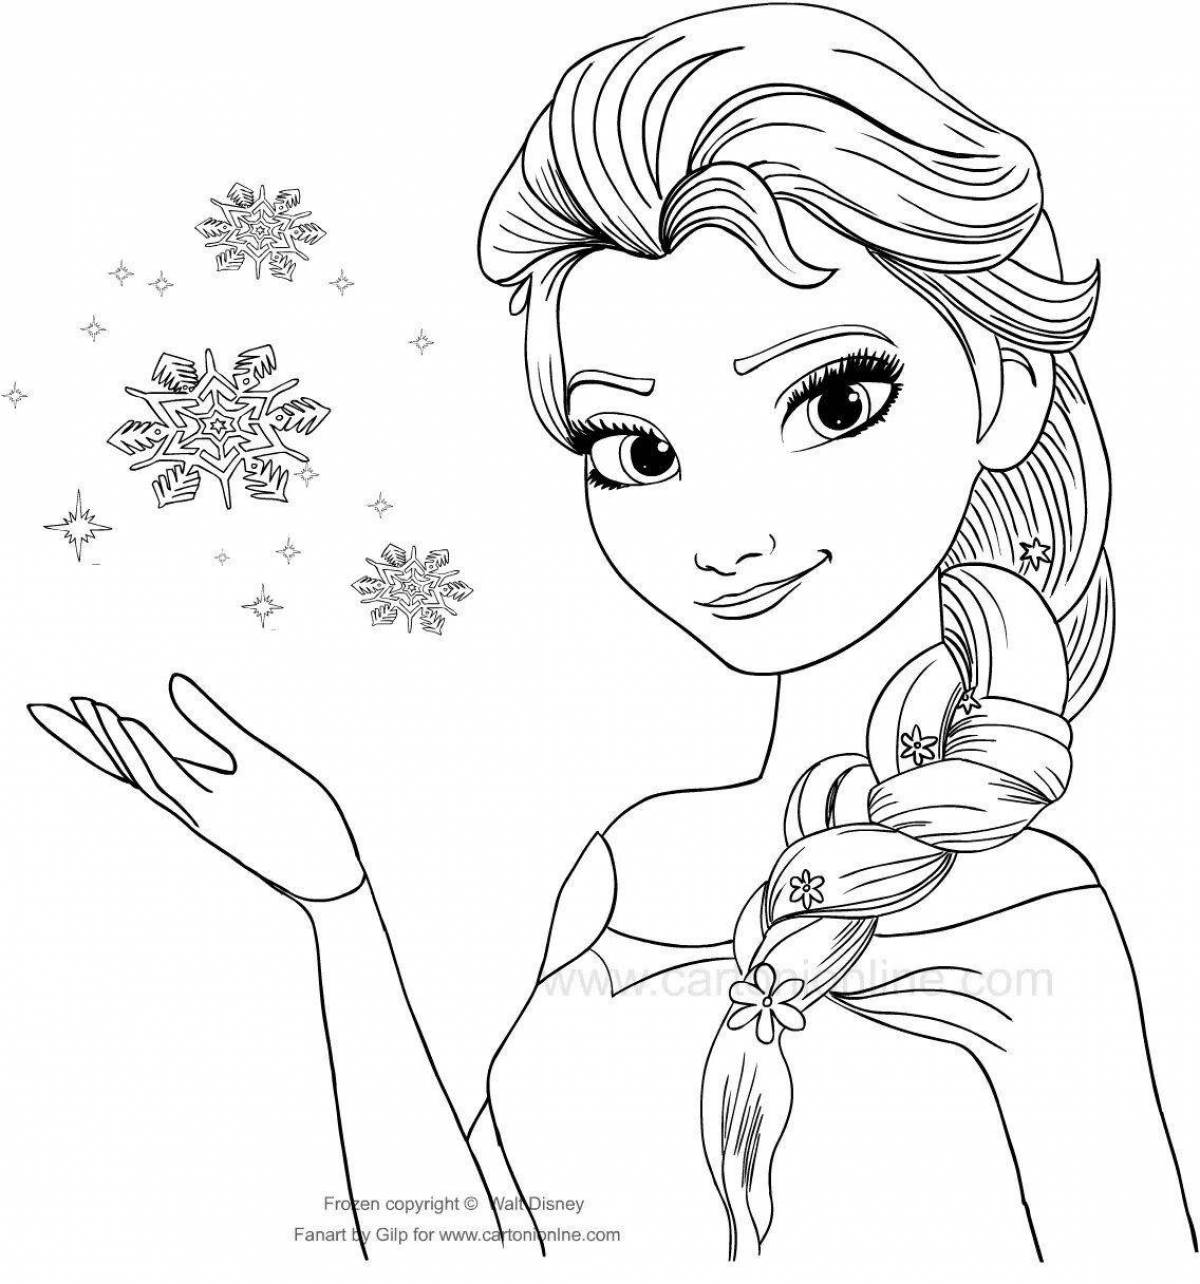 Refreshing winter portrait coloring page